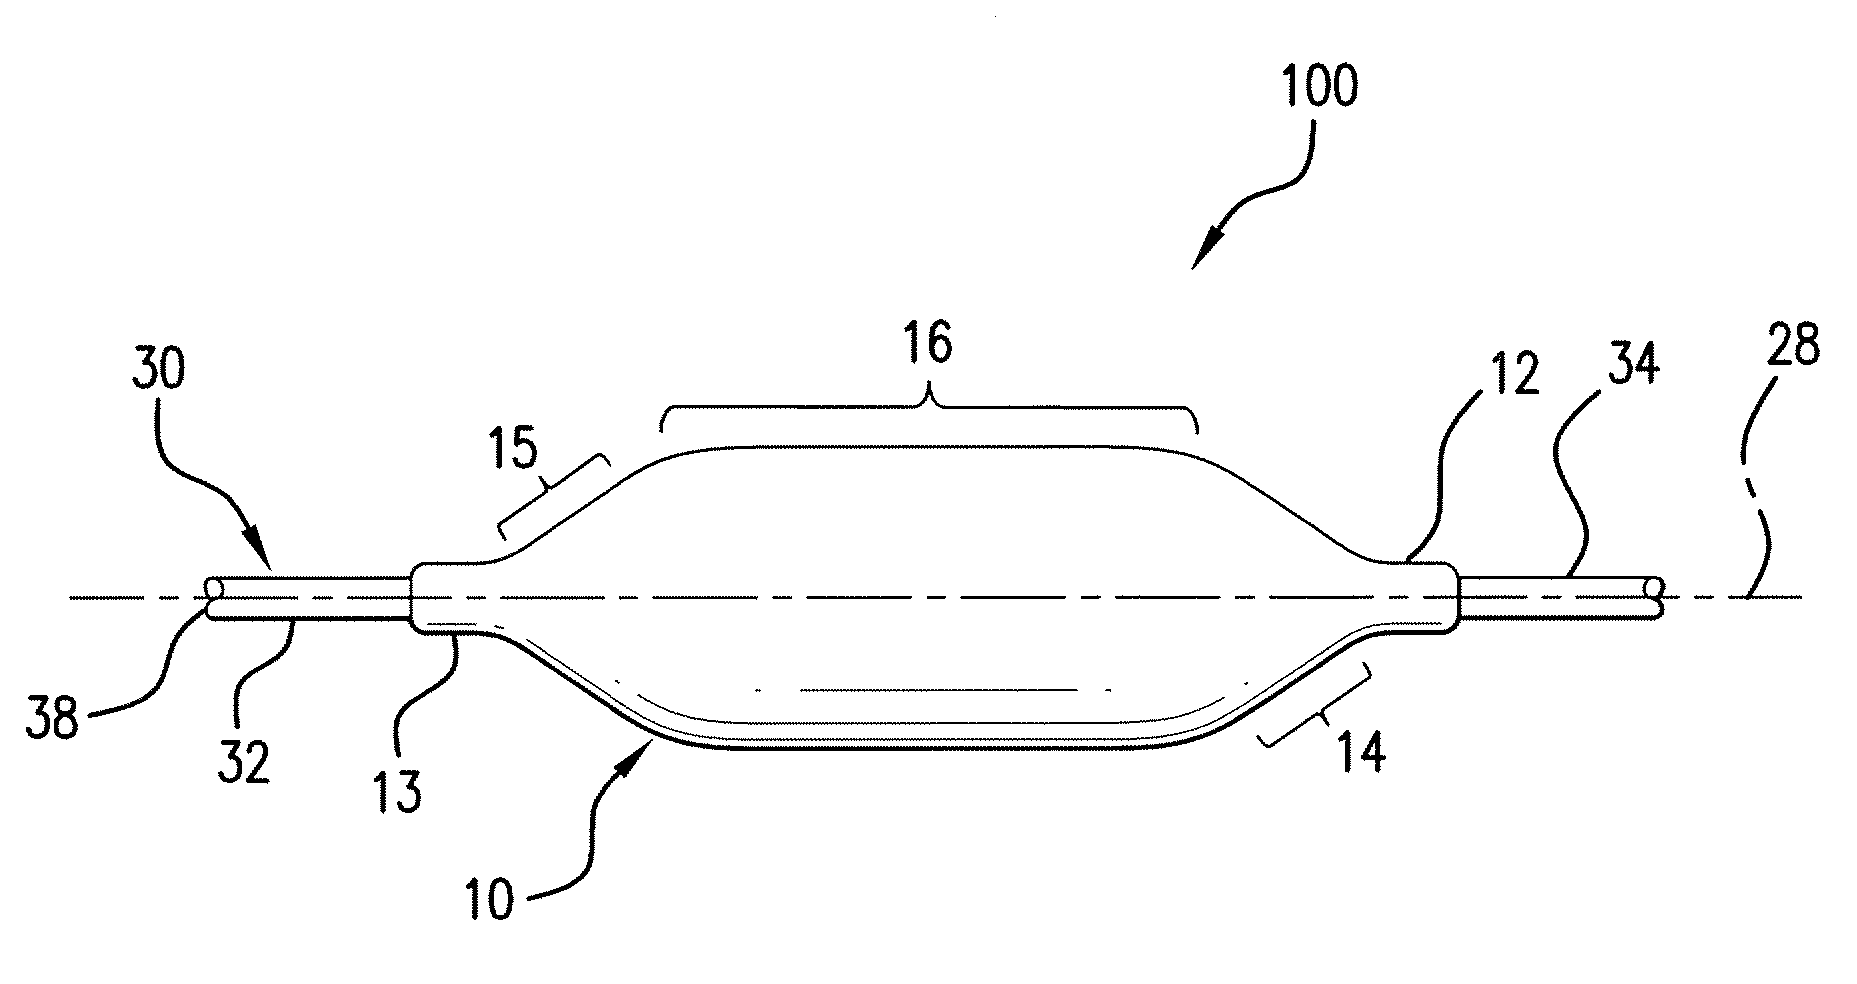 Method of reducing rigidity of angioplasty balloon sections